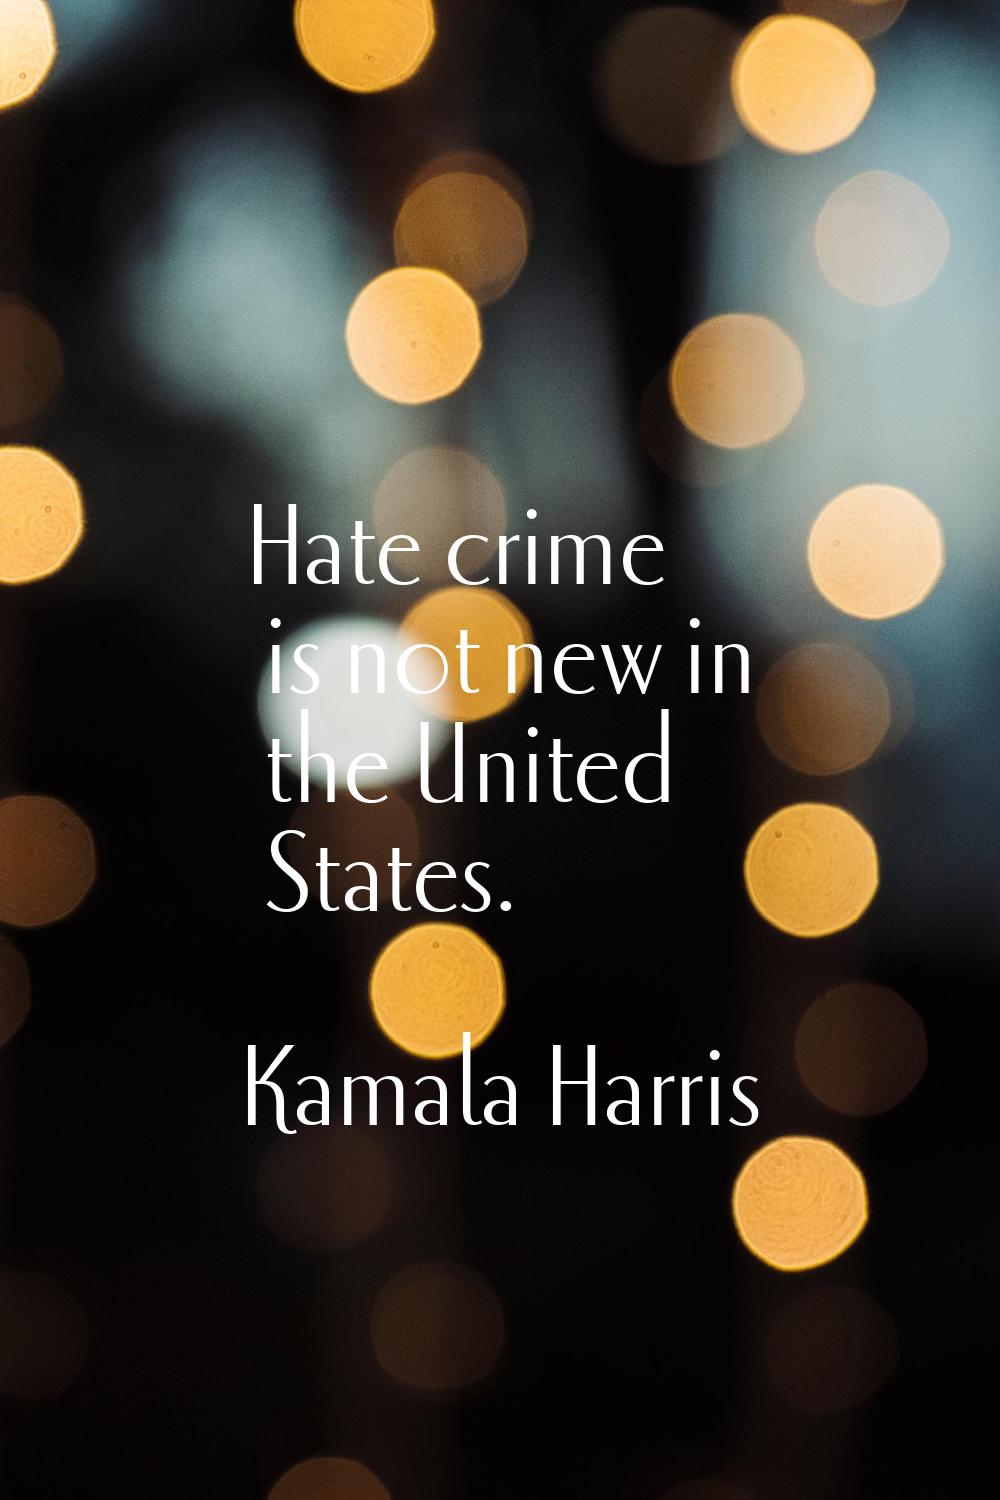 Hate crime is not new in the United States.